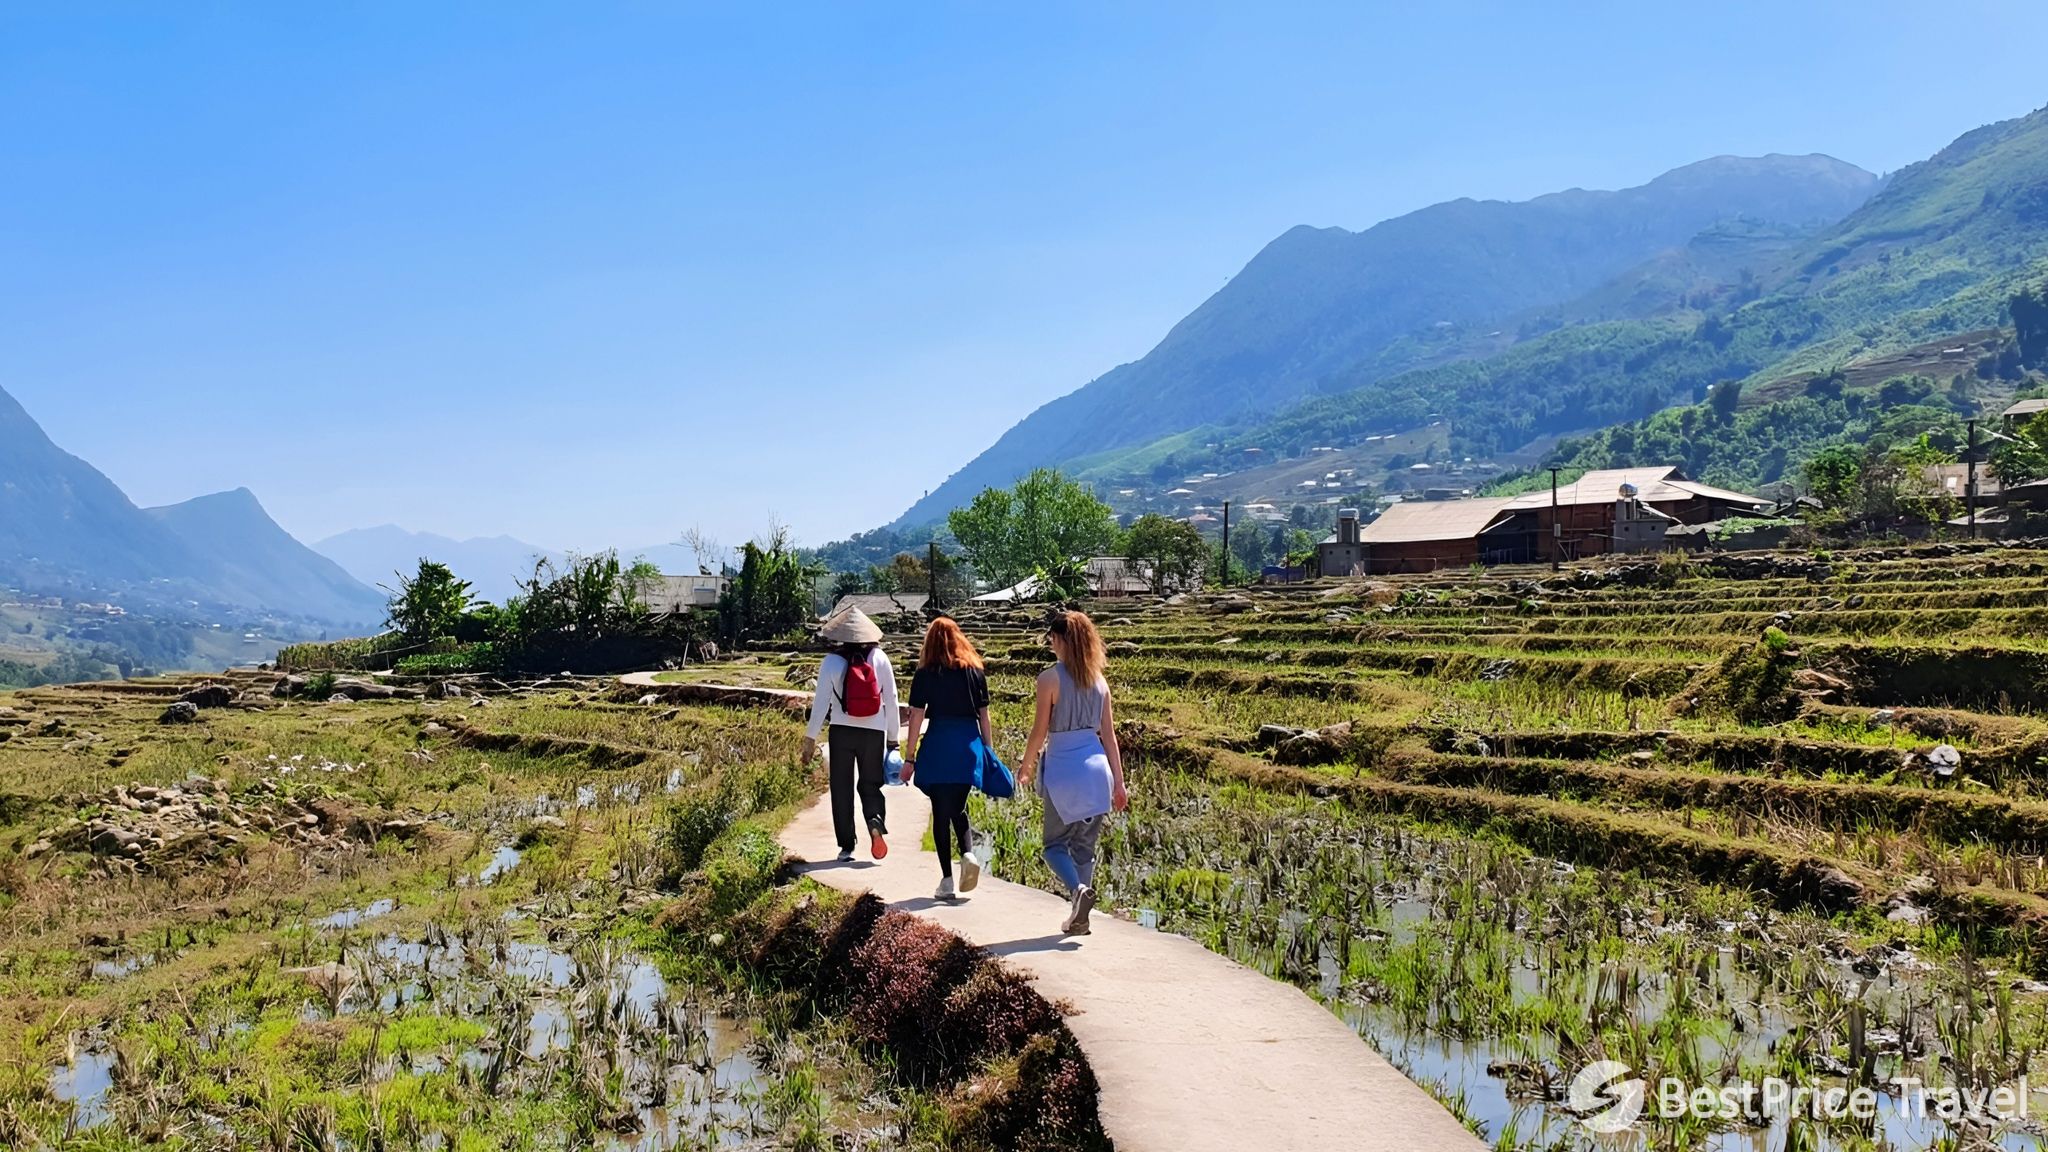 Day 3 Admire The Scenic Beauty Of Rice Fields While Trekking